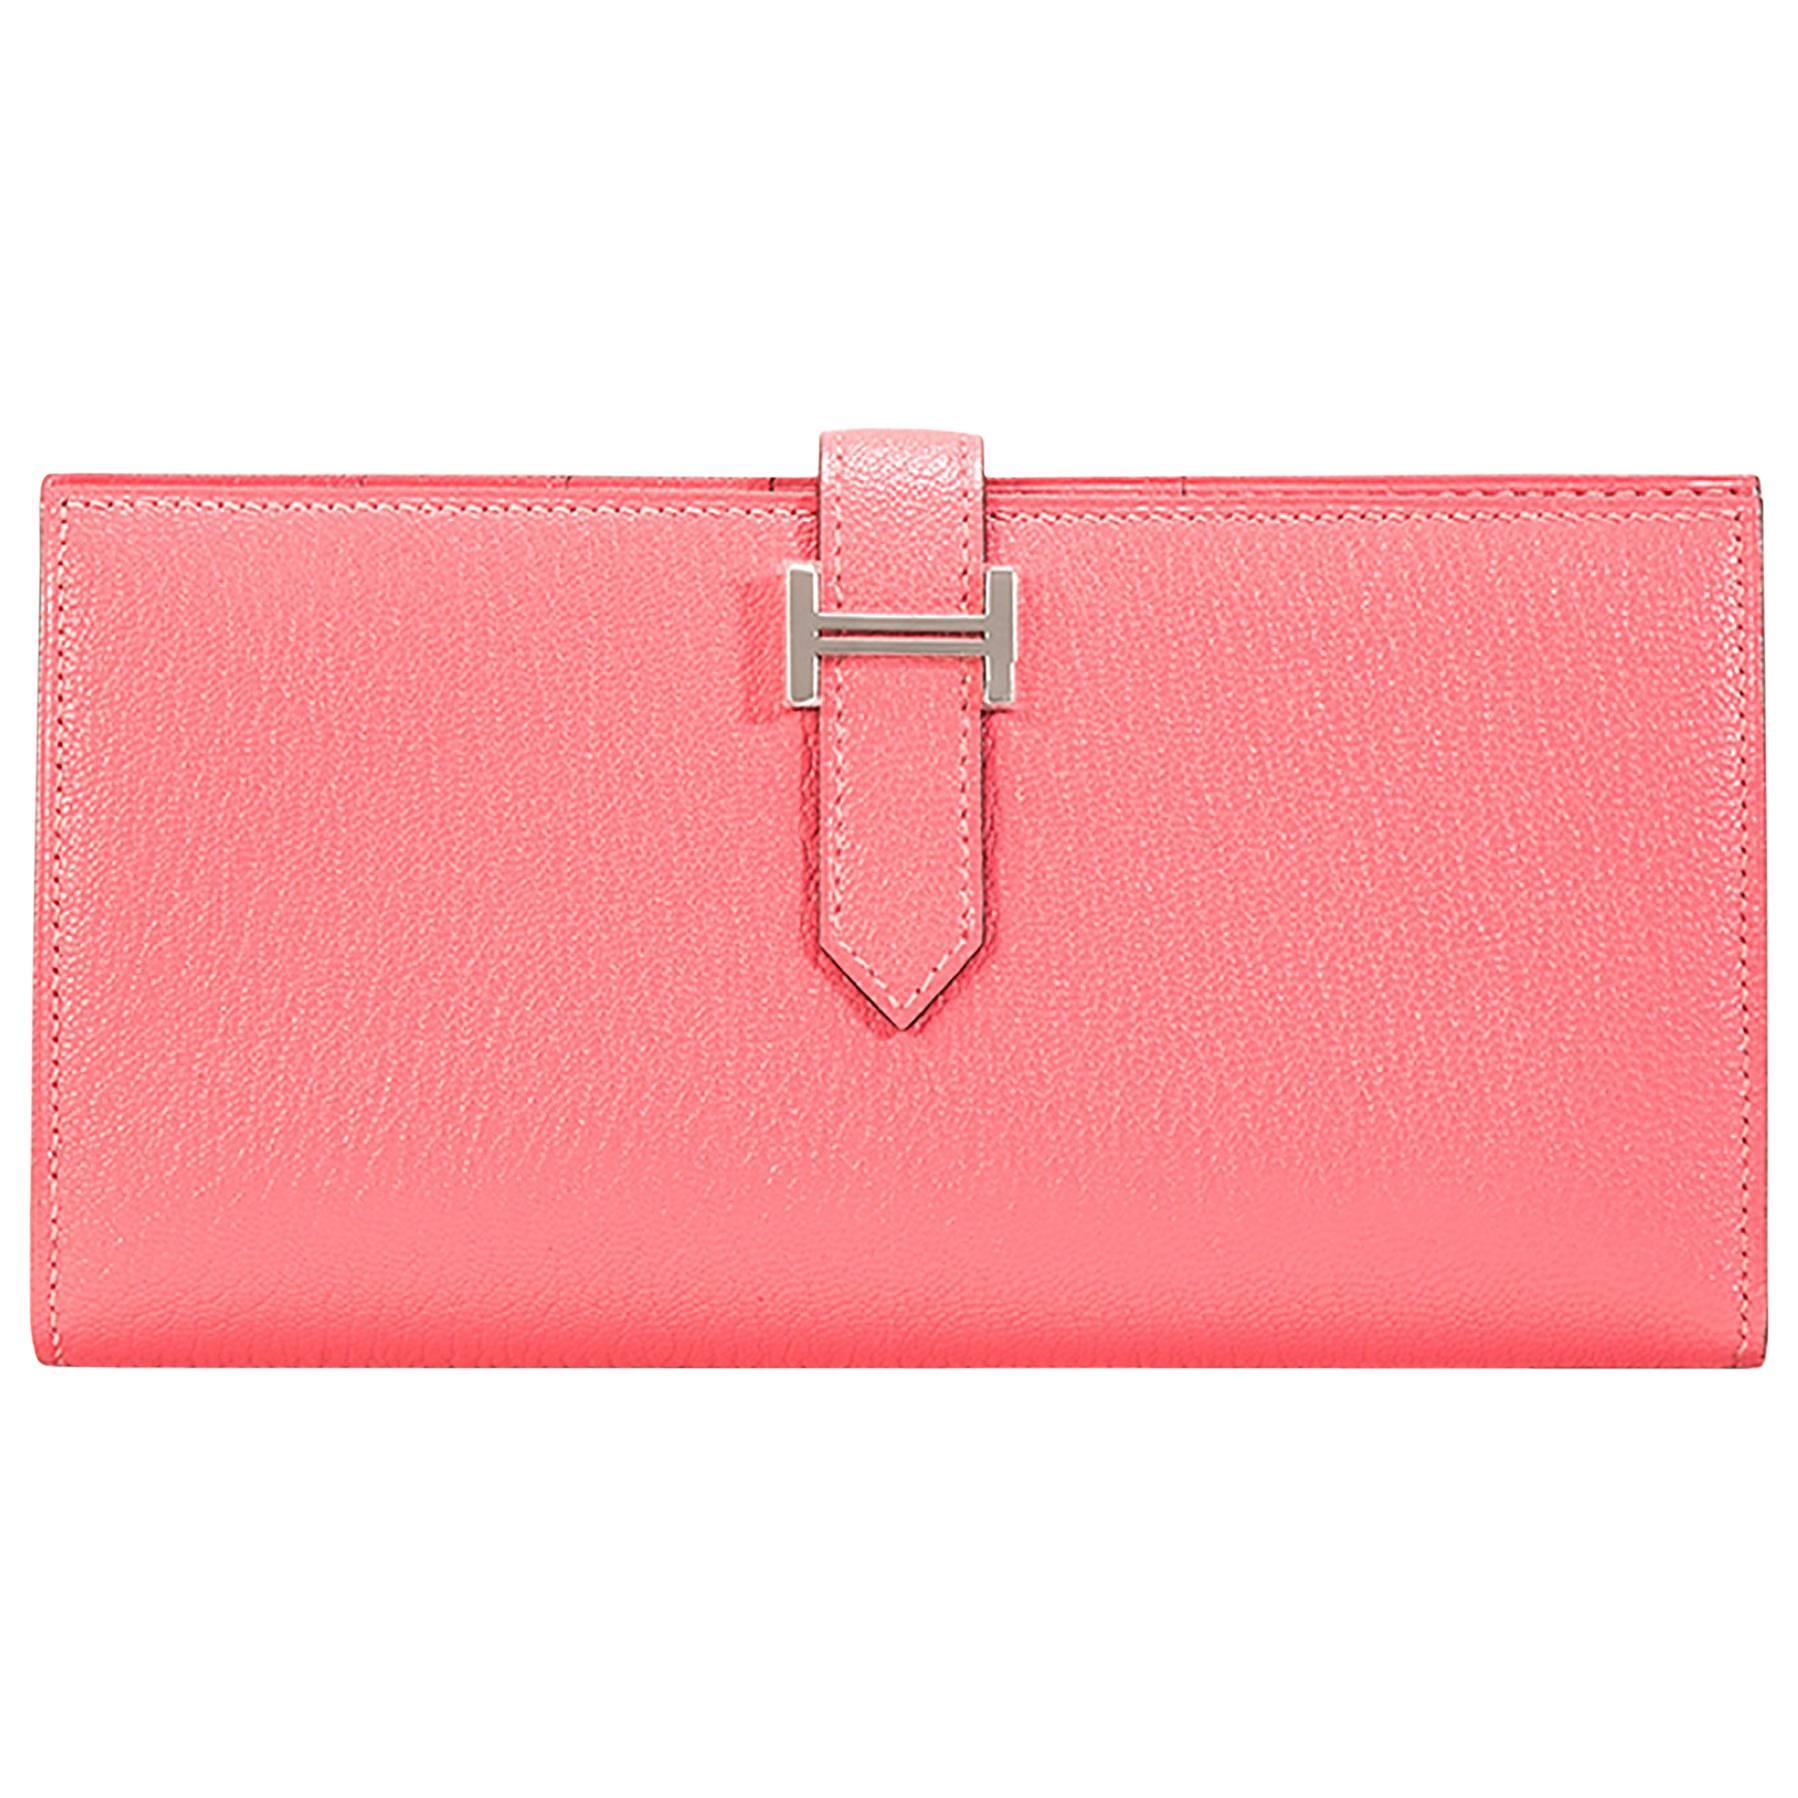 Hermes "Bearn" Wallet Epsom Leather Pink Color PHW